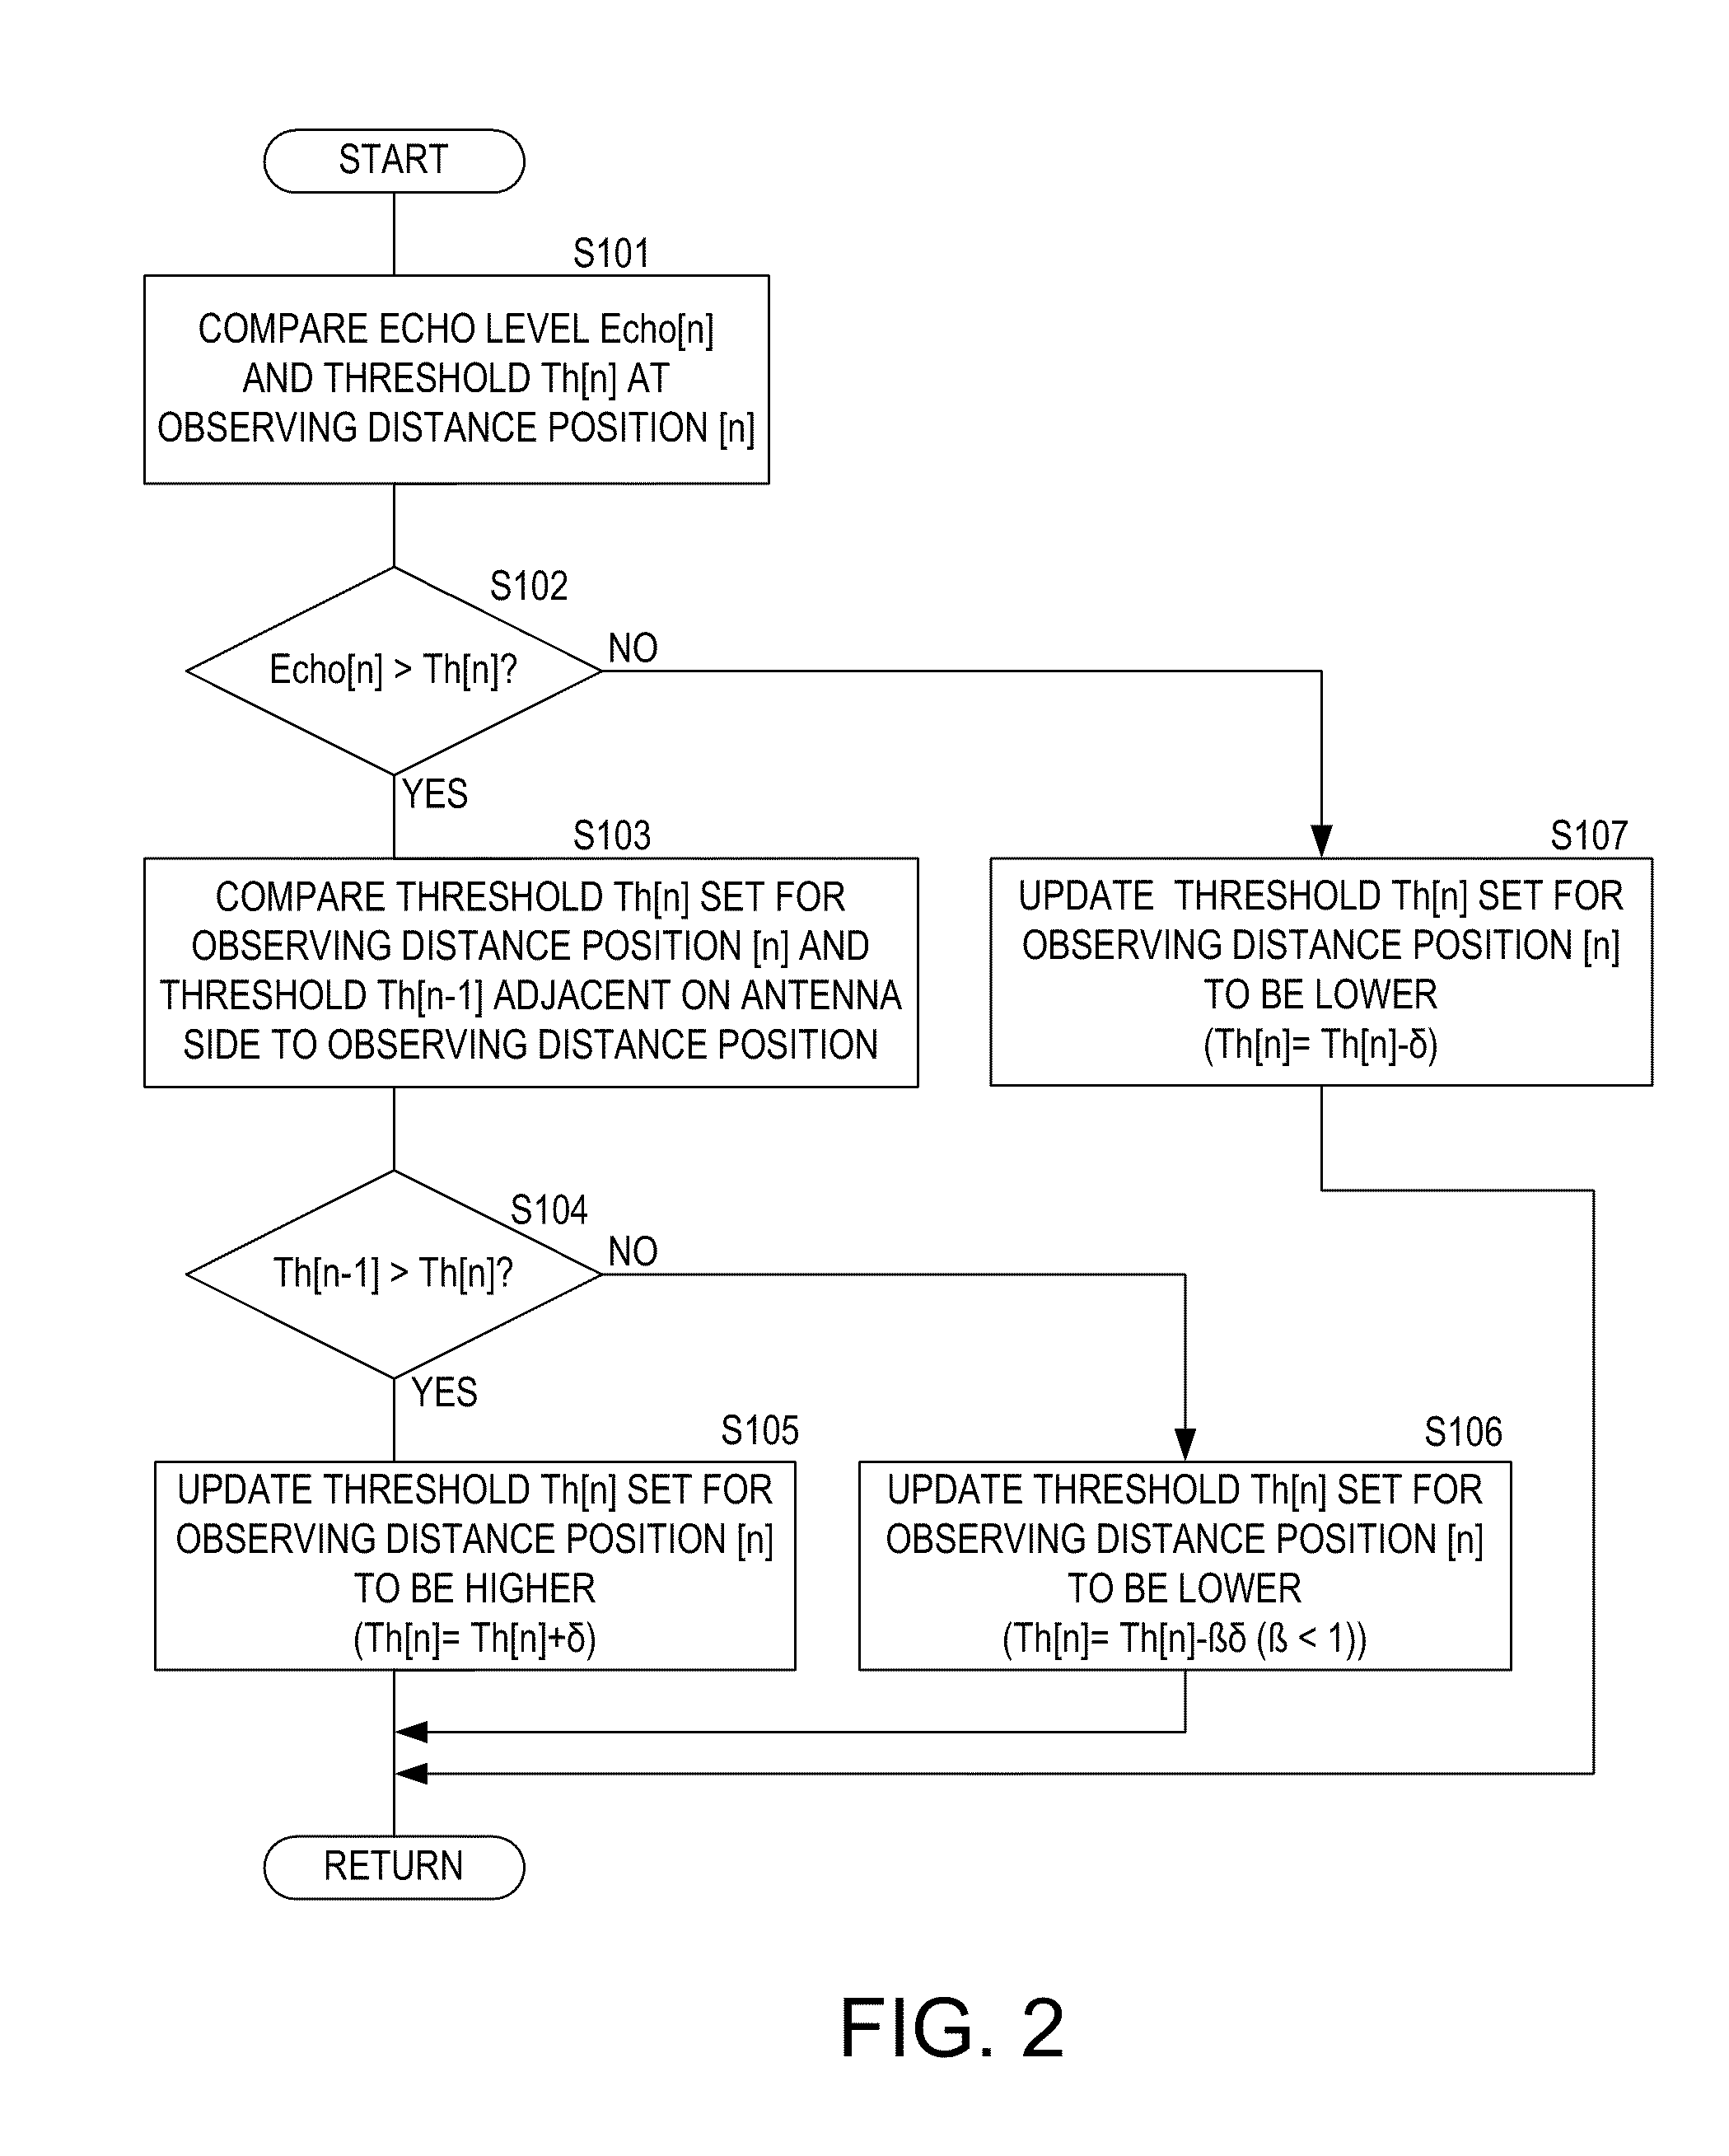 Method, device and program for setting threshold, and method, device and program for detecting target object